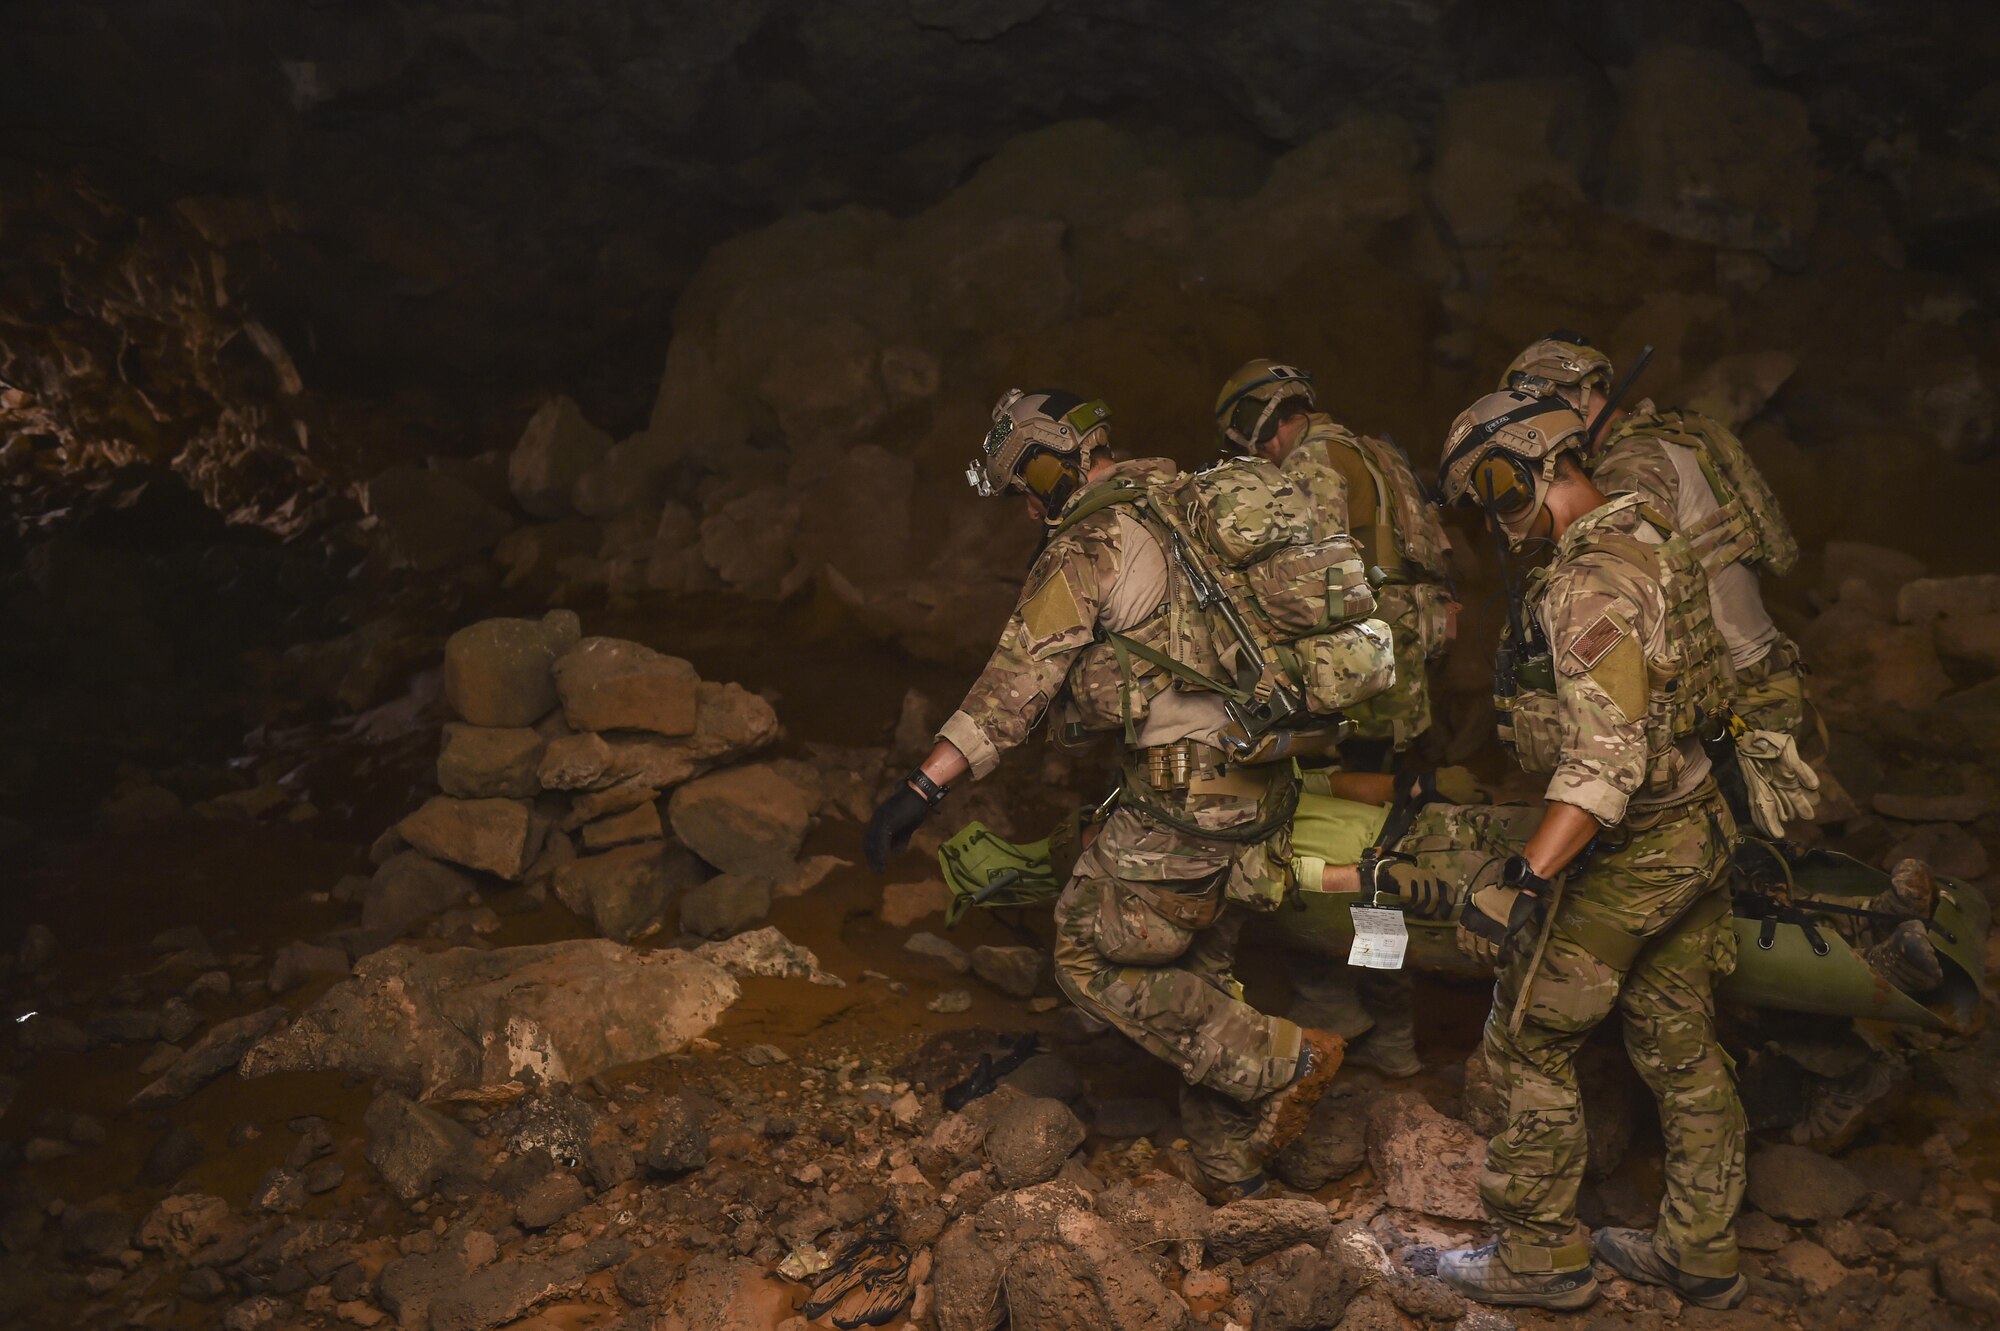 Air Force Special Tactics Airmen with the 24th Special Operations Wing and Italian special operations forces carry a simulated casualty through the Al Biadia Cave Complex during a personnel rescue mission for Eager Lion, May 13, 2017, in Mafraq Province, Jordan. Eager Lion 2017, an annual U.S. Central Command exercise in Jordan designed to strengthen military-to-military relationships between the U.S., Jordan and other international partners. This year's iteration is comprised of about 7,200 military personnel from more than 20 nations that will respond to scenarios involving border security, command and control, cyber defense and battlespace management. (U.S. Air Force photo by Senior Airman Ryan Conroy)